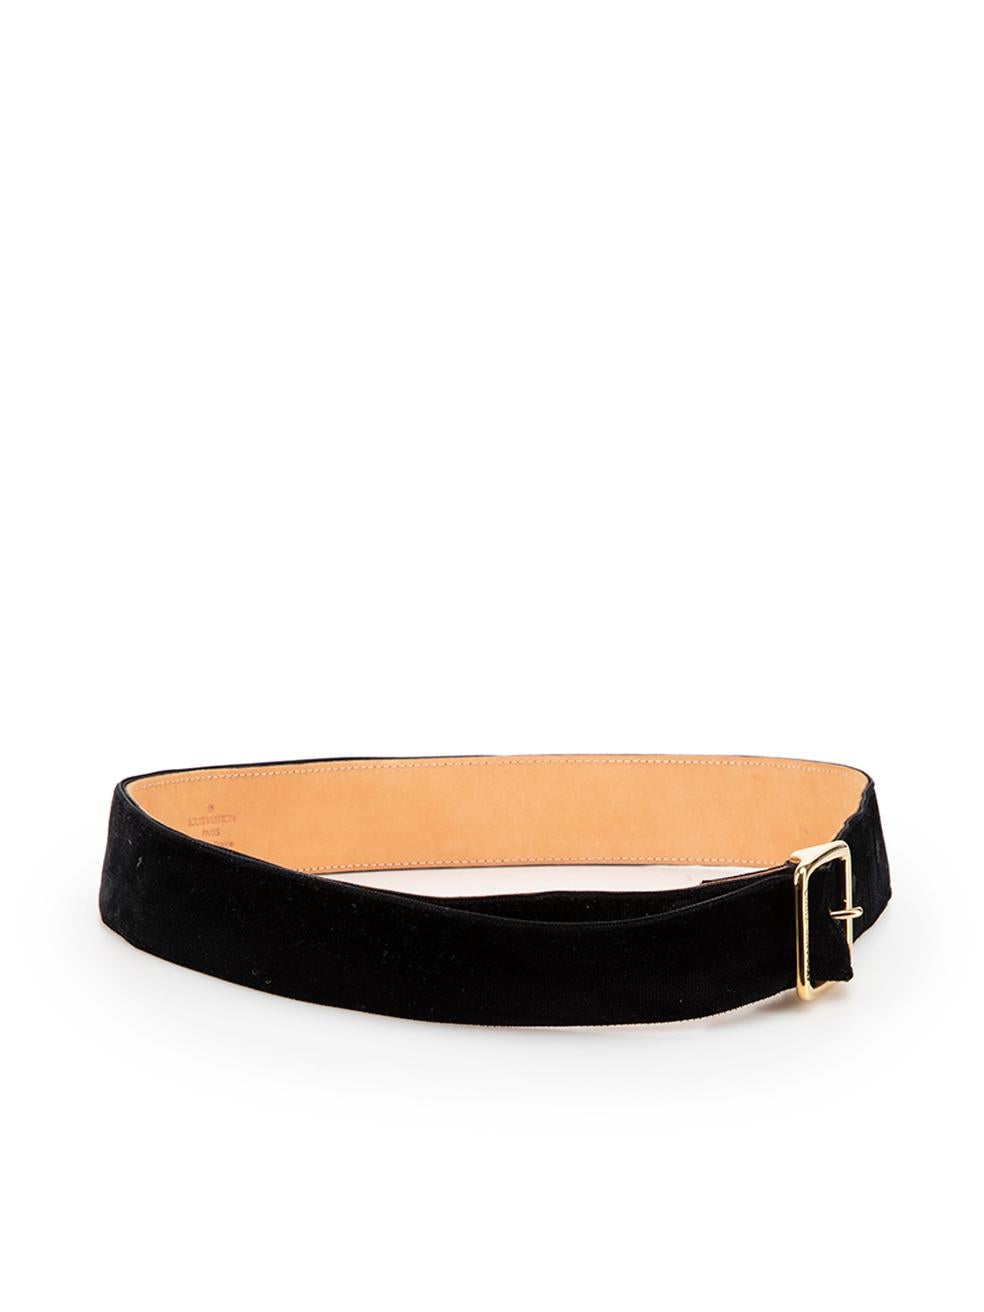 CONDITION is Very good. Minimal wear to belt is evident. Minimal wear to the buckle hardware with small discoloured speck to the metal on this used Louis Vuitton designer resale item. This item comes with original dust